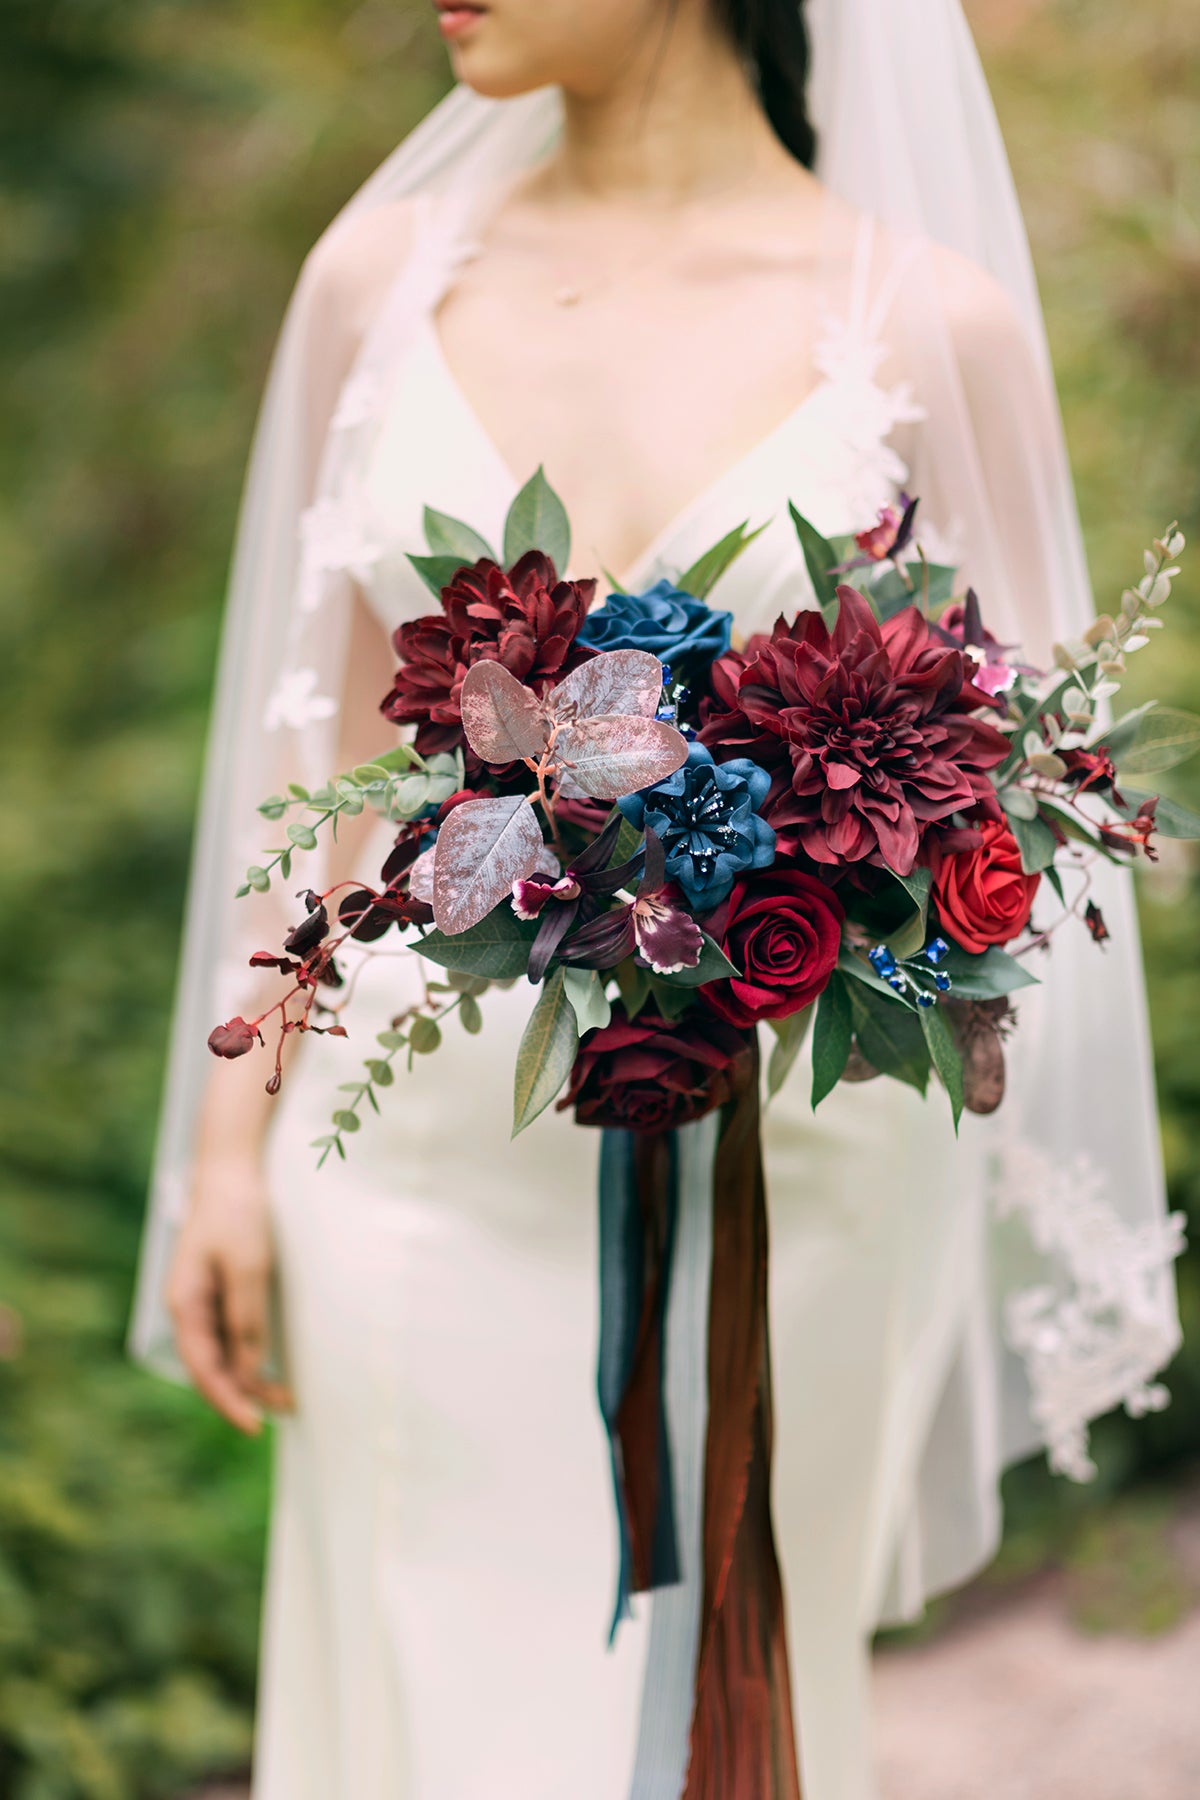 Small Free-Form Bridal Bouquet in Burgundy & Navy